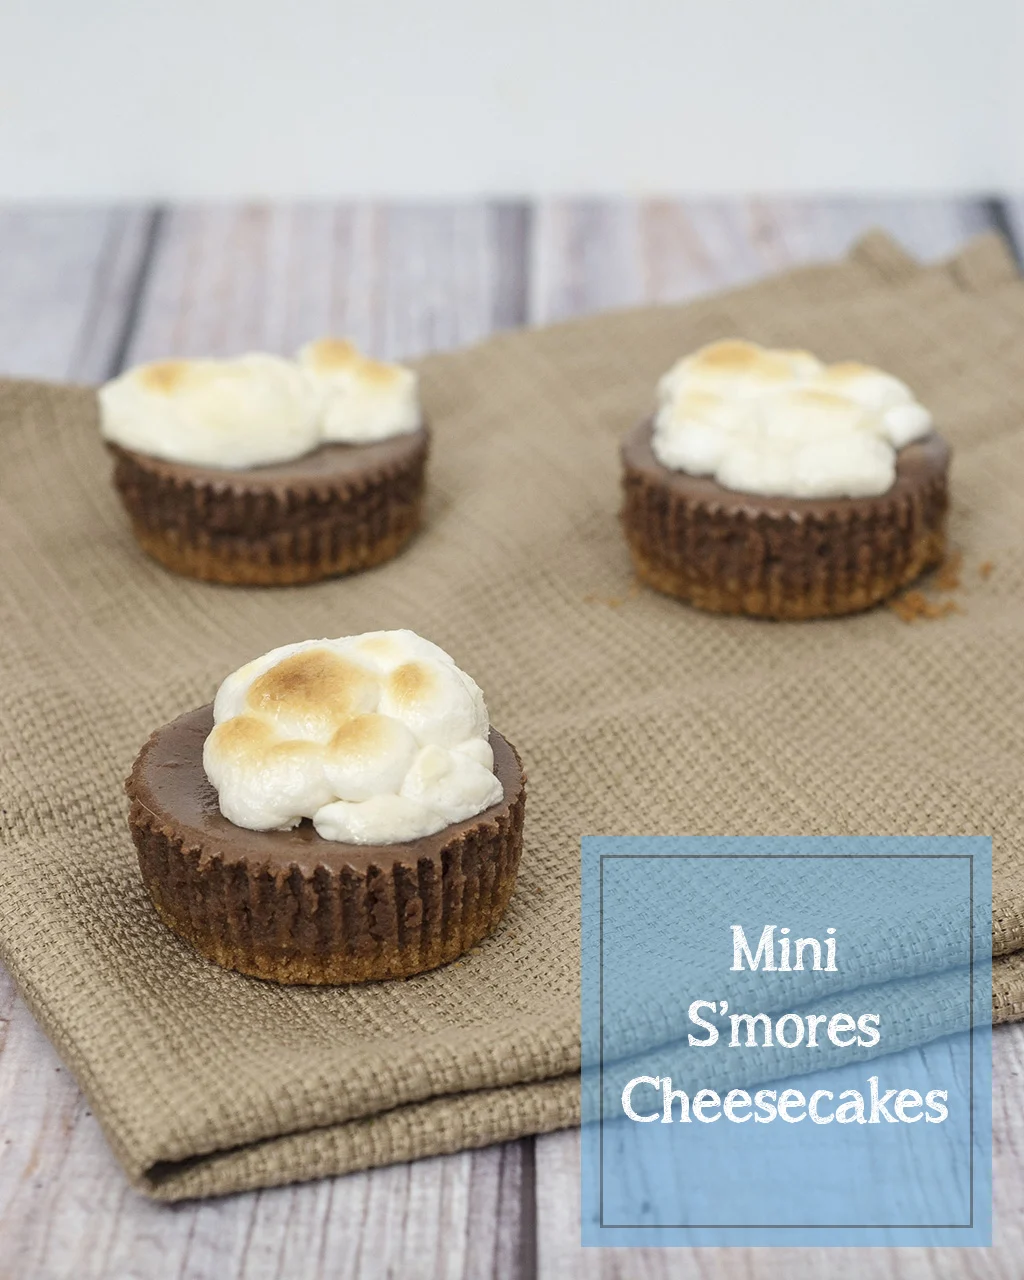 S'mores turn elegant in the form of mini chocolate cheesecakes with graham cracker crusts, topped with marshmallows toasted under the broiler. TheRedheadBaker.com #WhatsBaking